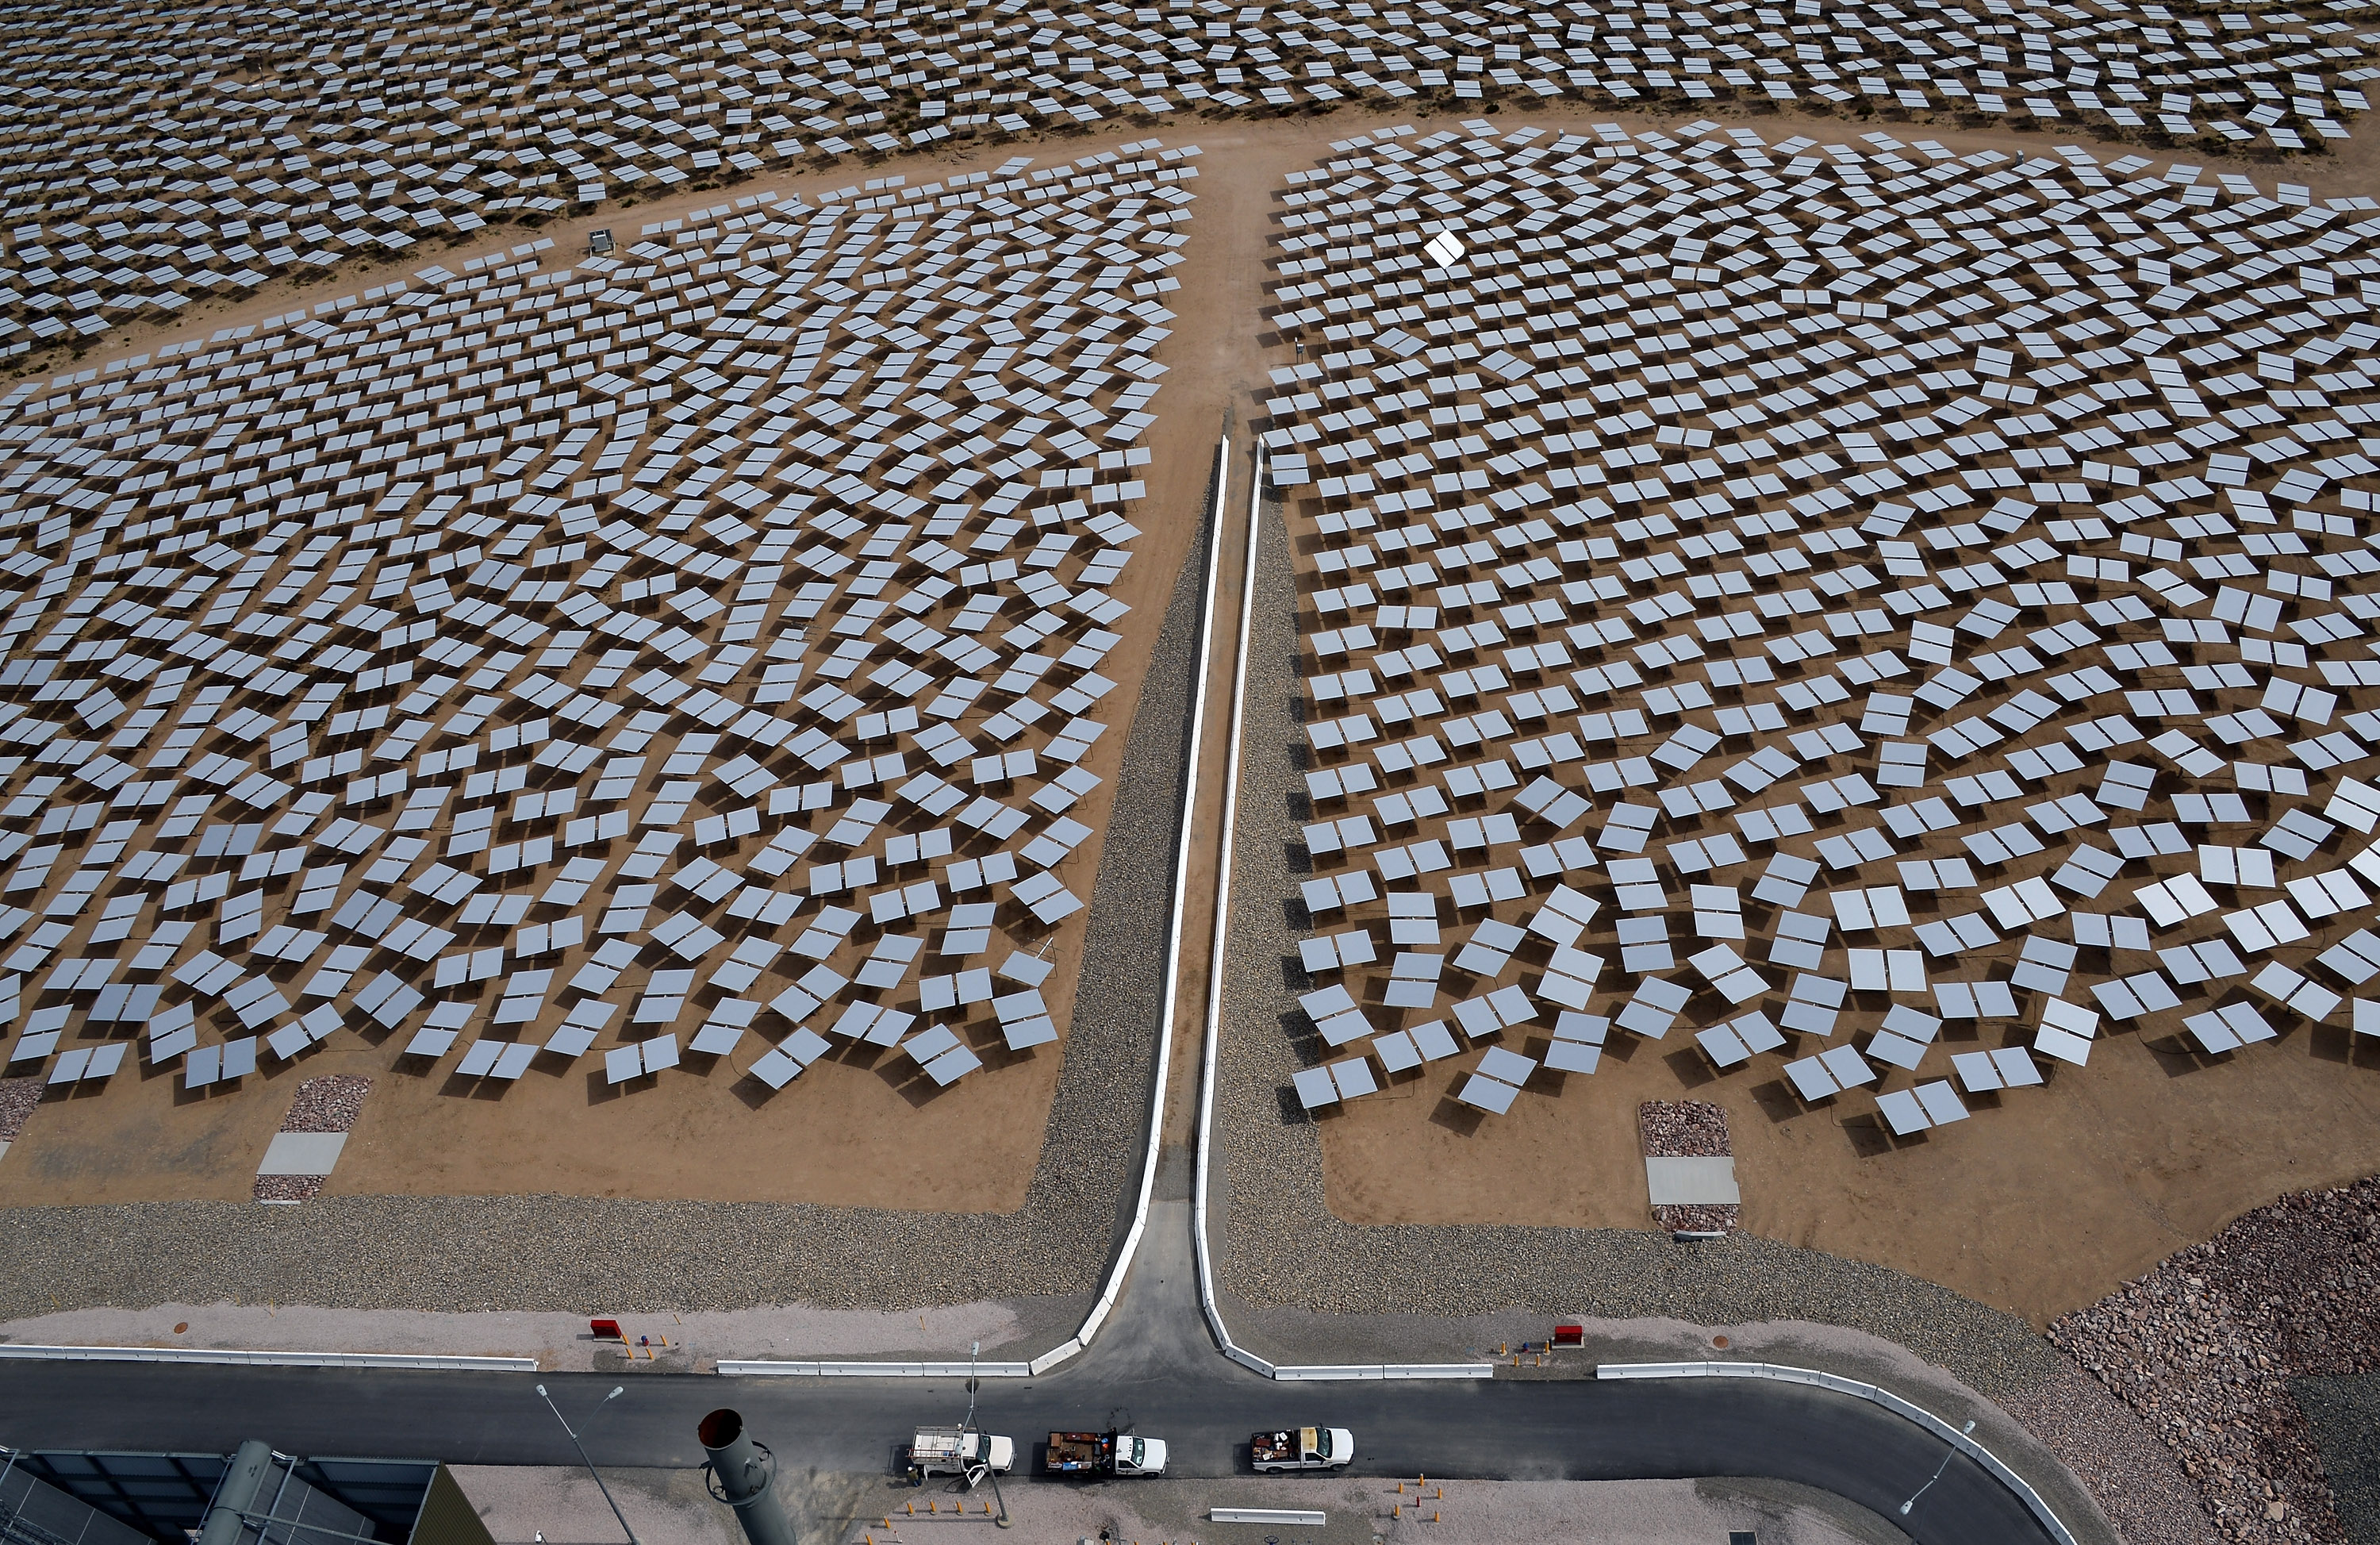 Heliostats at the Ivanpah Solar Electric Generating System are seen from above in the Mojave Desert in California near Primm, Nev., on March 3, 2014. (Ethan Miller/Getty Images)